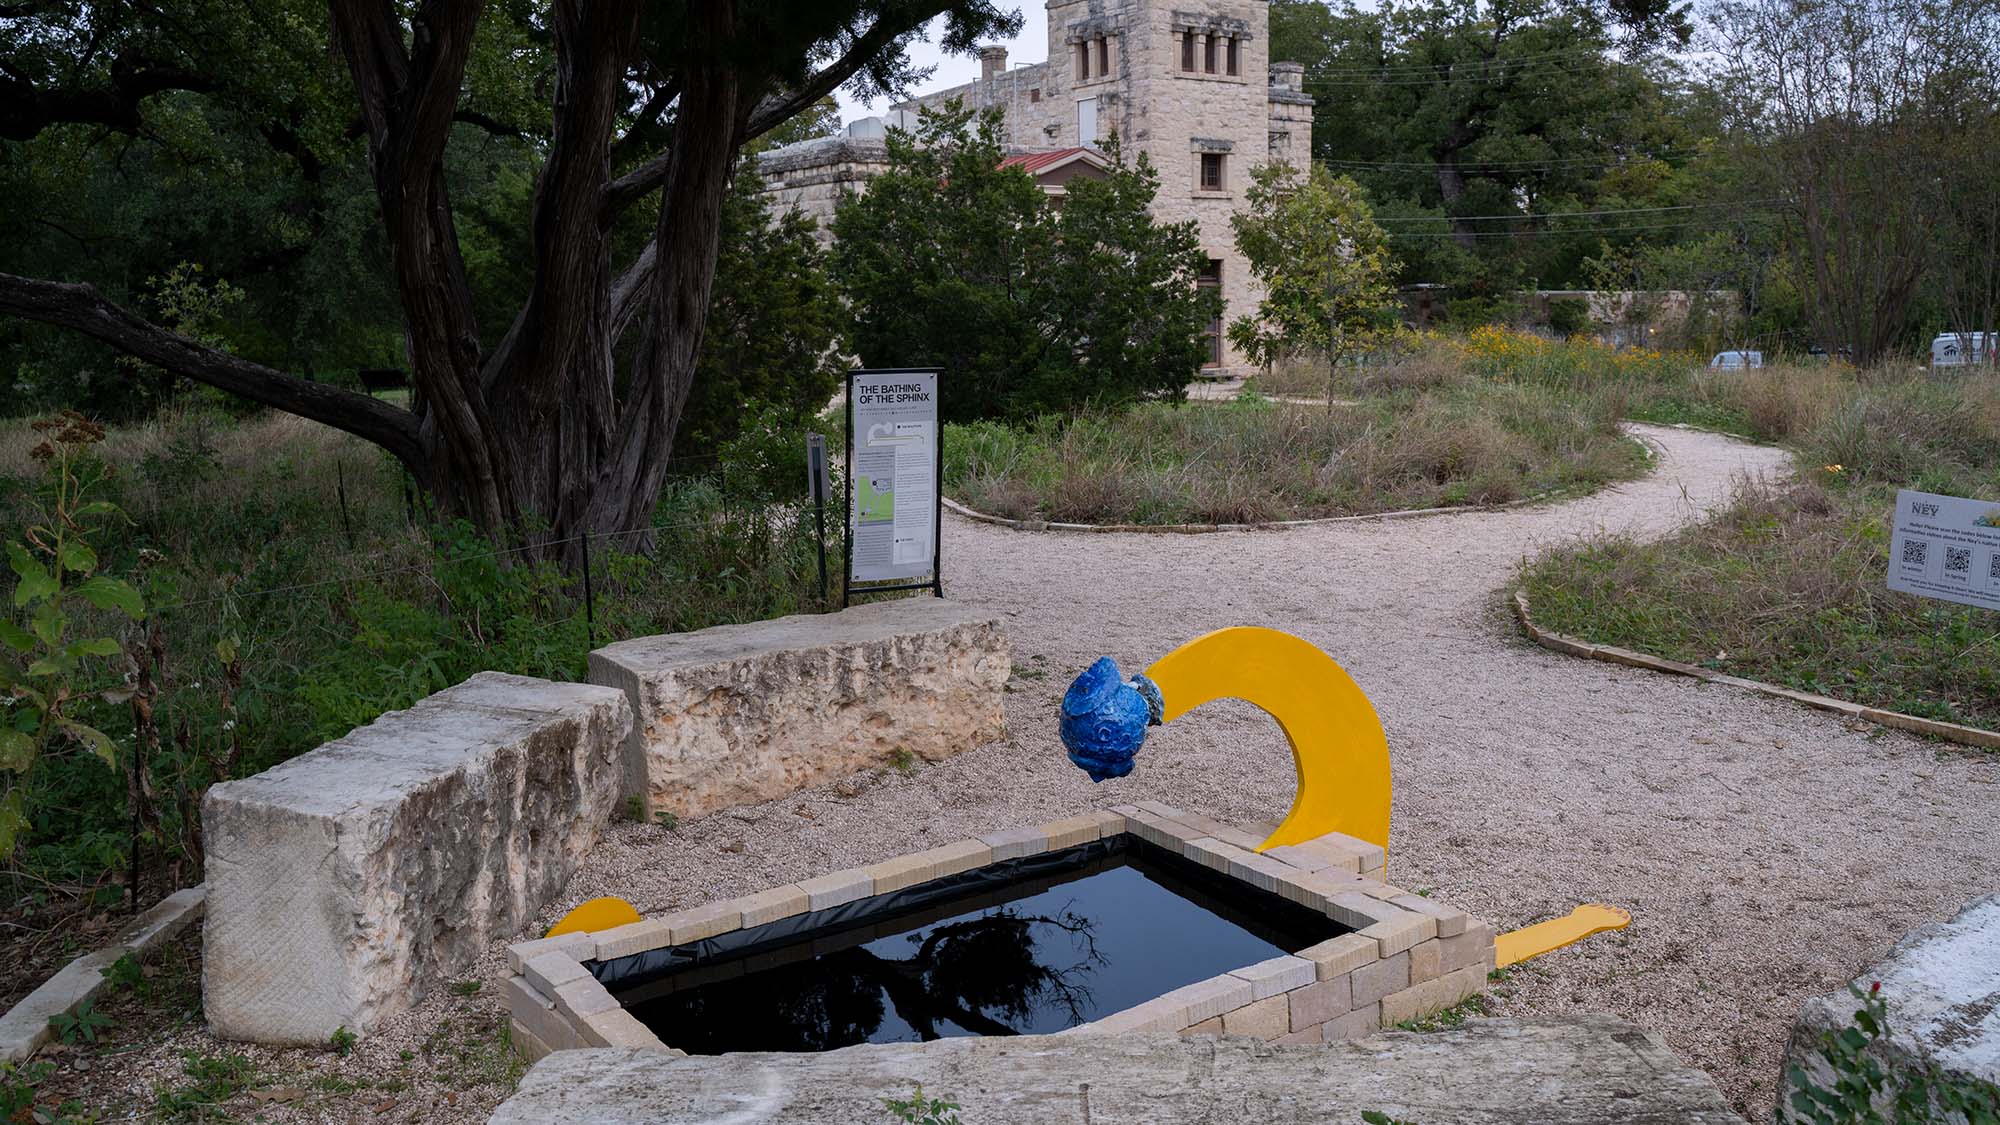 sculpture of shpinx/reflecting pool in the grounds of the Ney museum